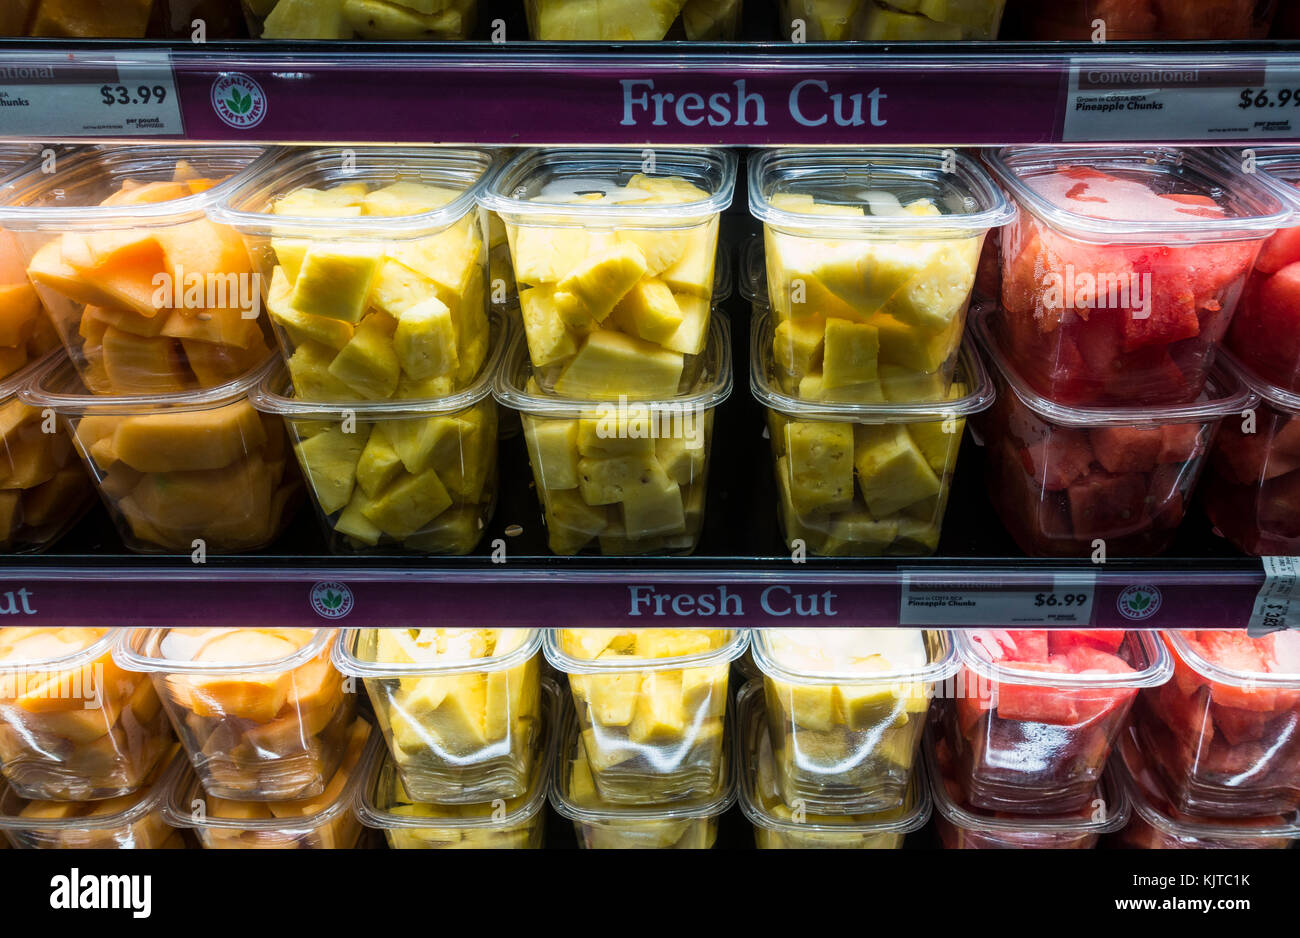 Fresh Fruits Delivery - Cupit Food - Wholesale Food Supplier